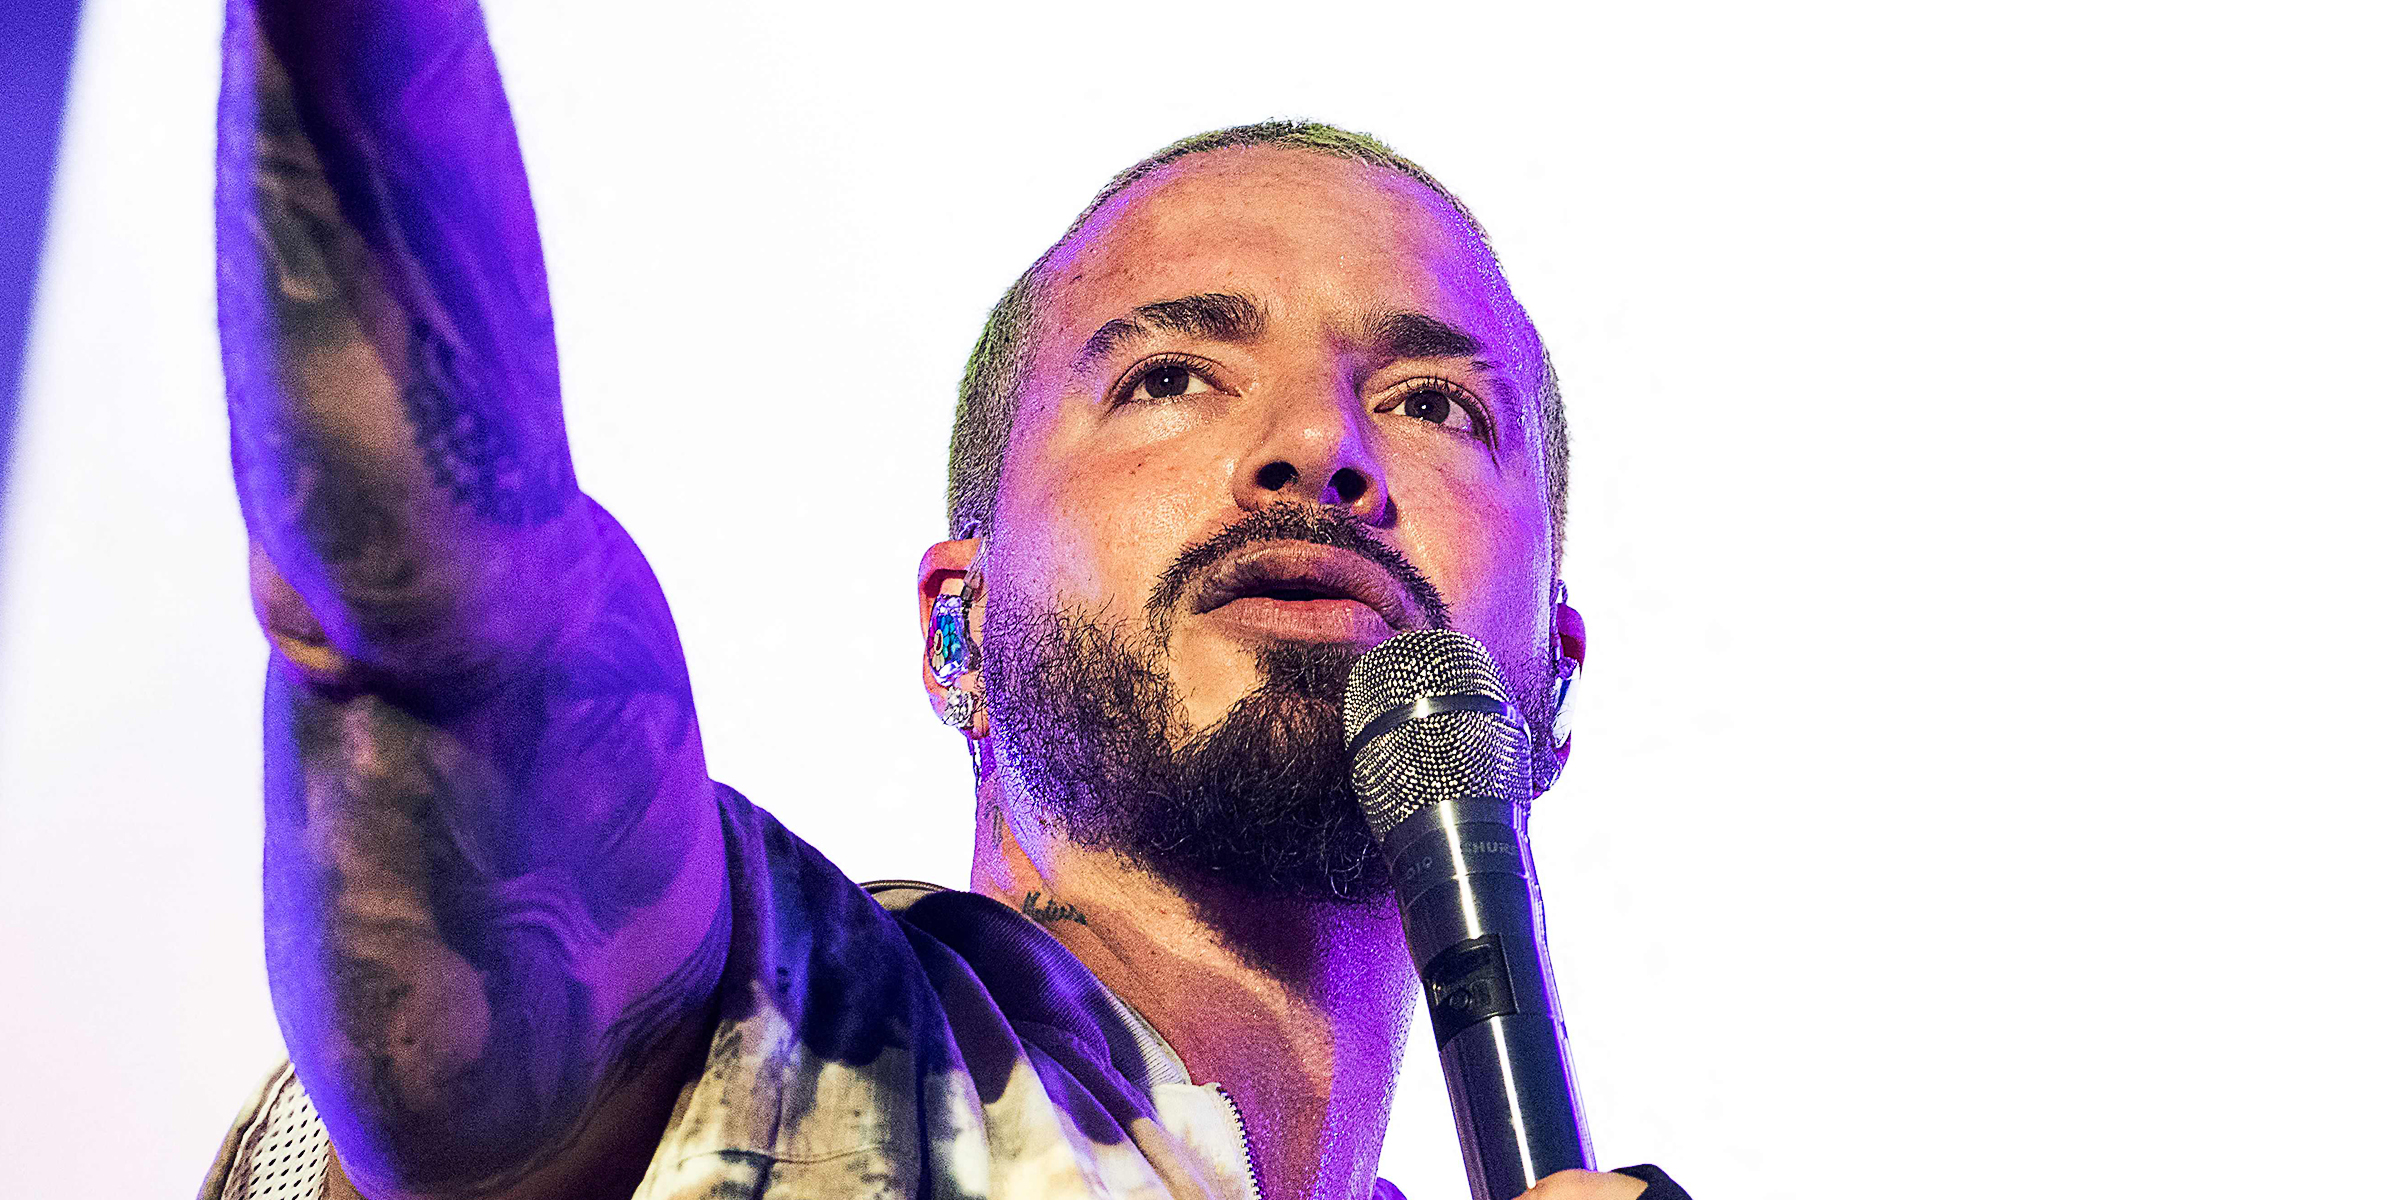 J Balvin | Source: Getty Images